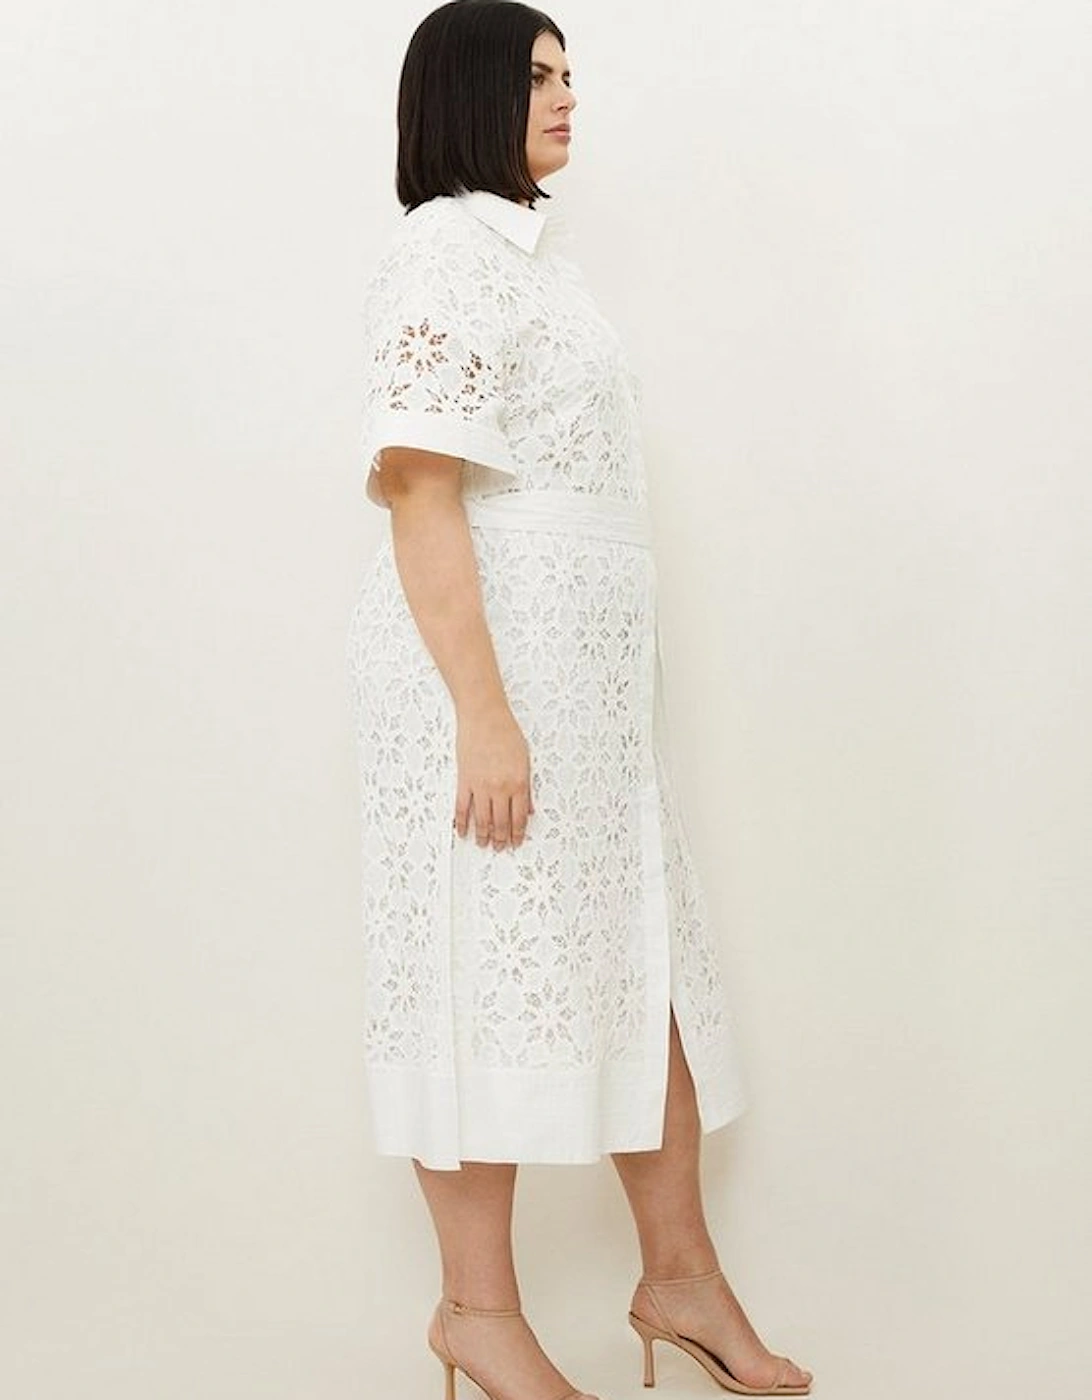 Plus Size Crafted Cotton Embroidery Woven Shirt Maxi Dress